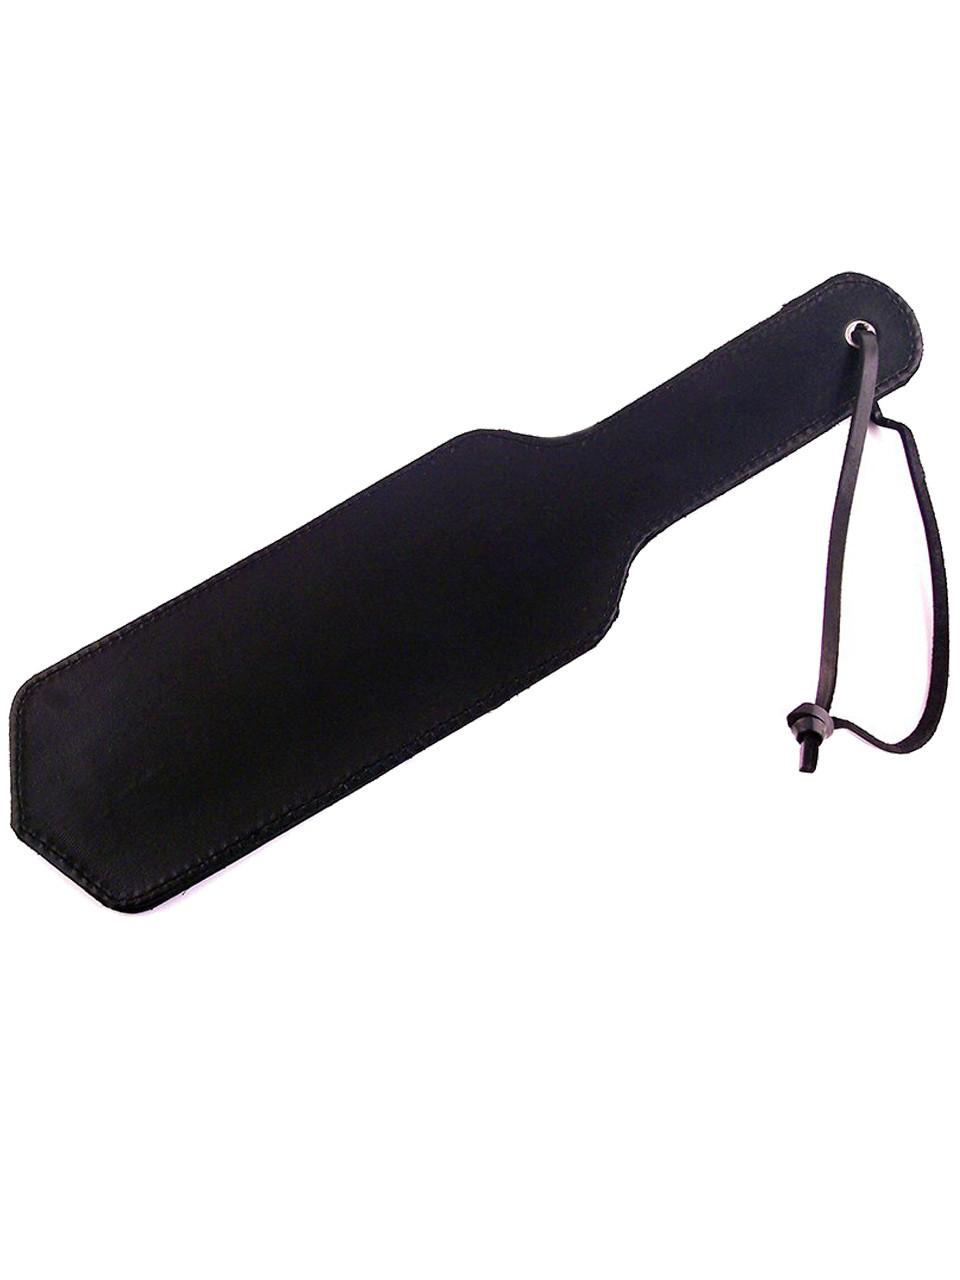 Rouge Wooden Shoe Shaped Spanking Paddle with Black Rubber Sole